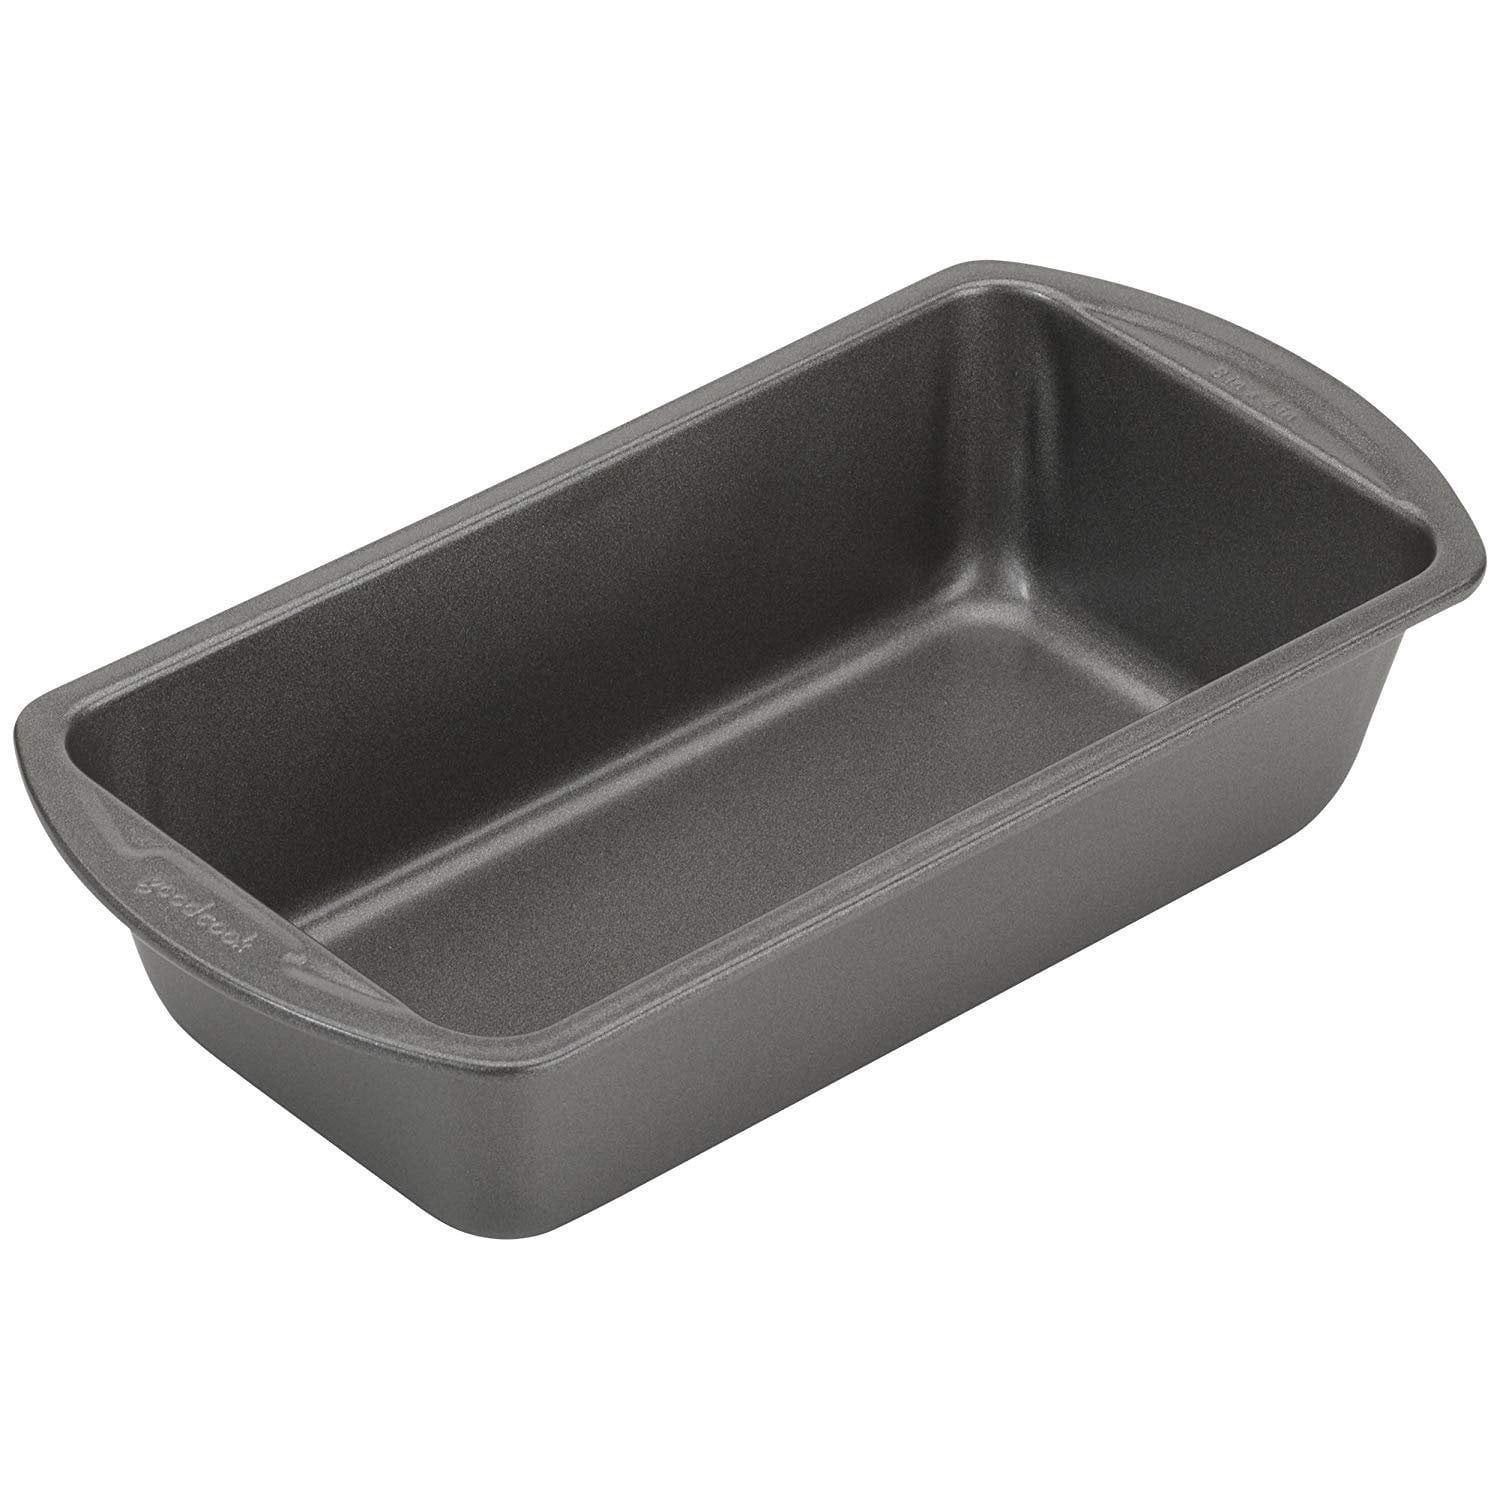 Premium Quality Non-Stick Silicone Bakeware WellBake Professional 1lb Loaf Pan 19cm x 9cm x 5cm 10 Year Guarantee 